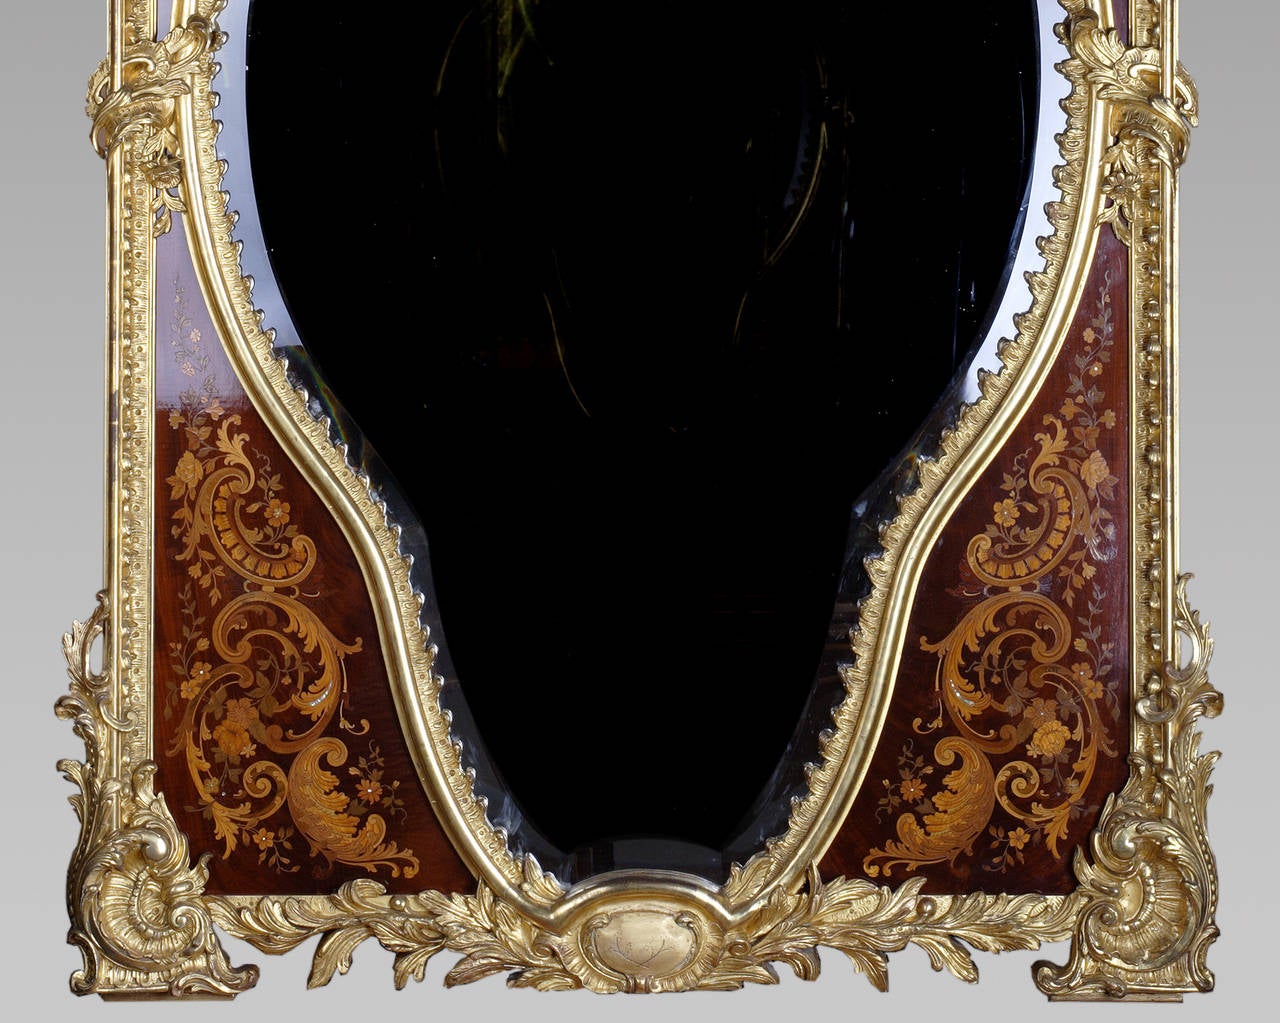 An important gilded wood and stucco mirror. Heart shaped bevelled mirror plate. Rich marquetry ornamentation with mother-of-pearl inlaid. Acanthus leaves, shells and flower baskets motifs surmounted by two putti holding flower garlands. 

Mirrors